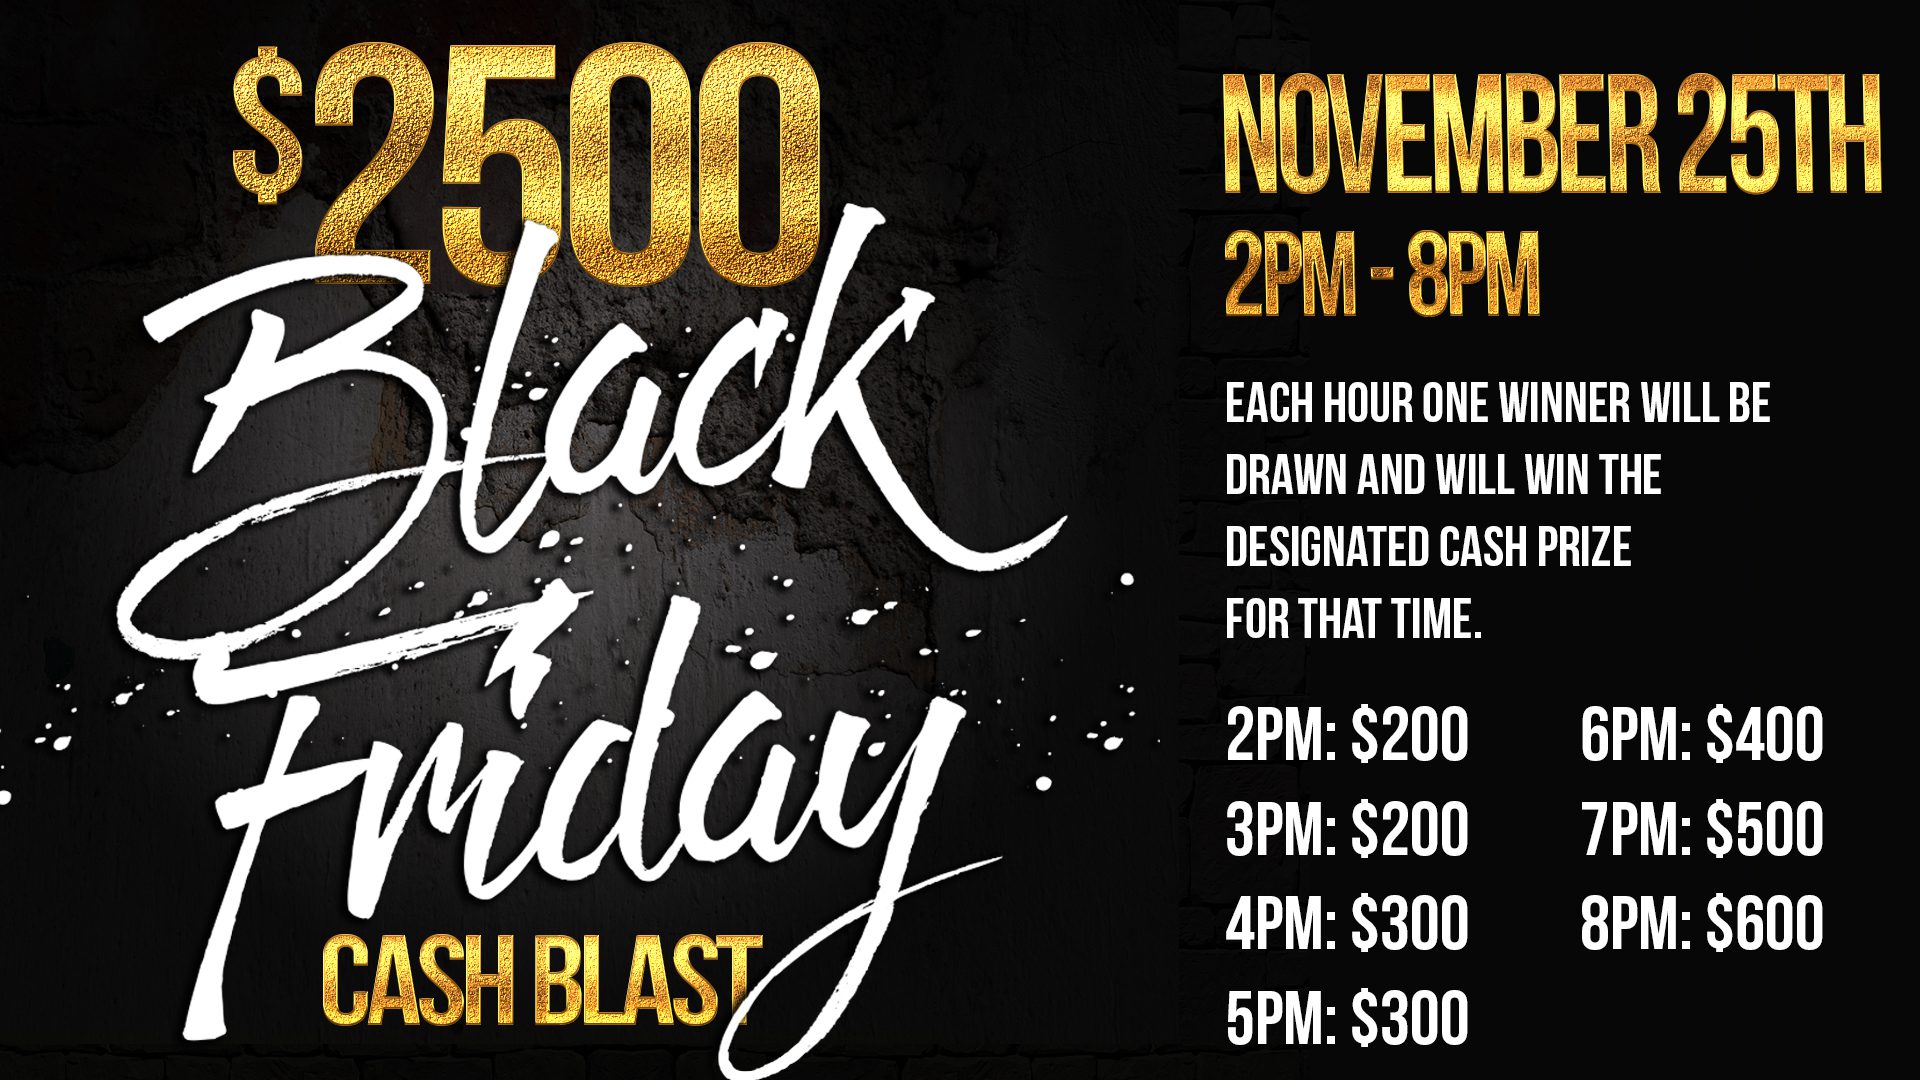 Promotional advertisement for a black friday cash blast event with prize money given away every hour on november 25th from 2pm to 8pm, totaling $2500.